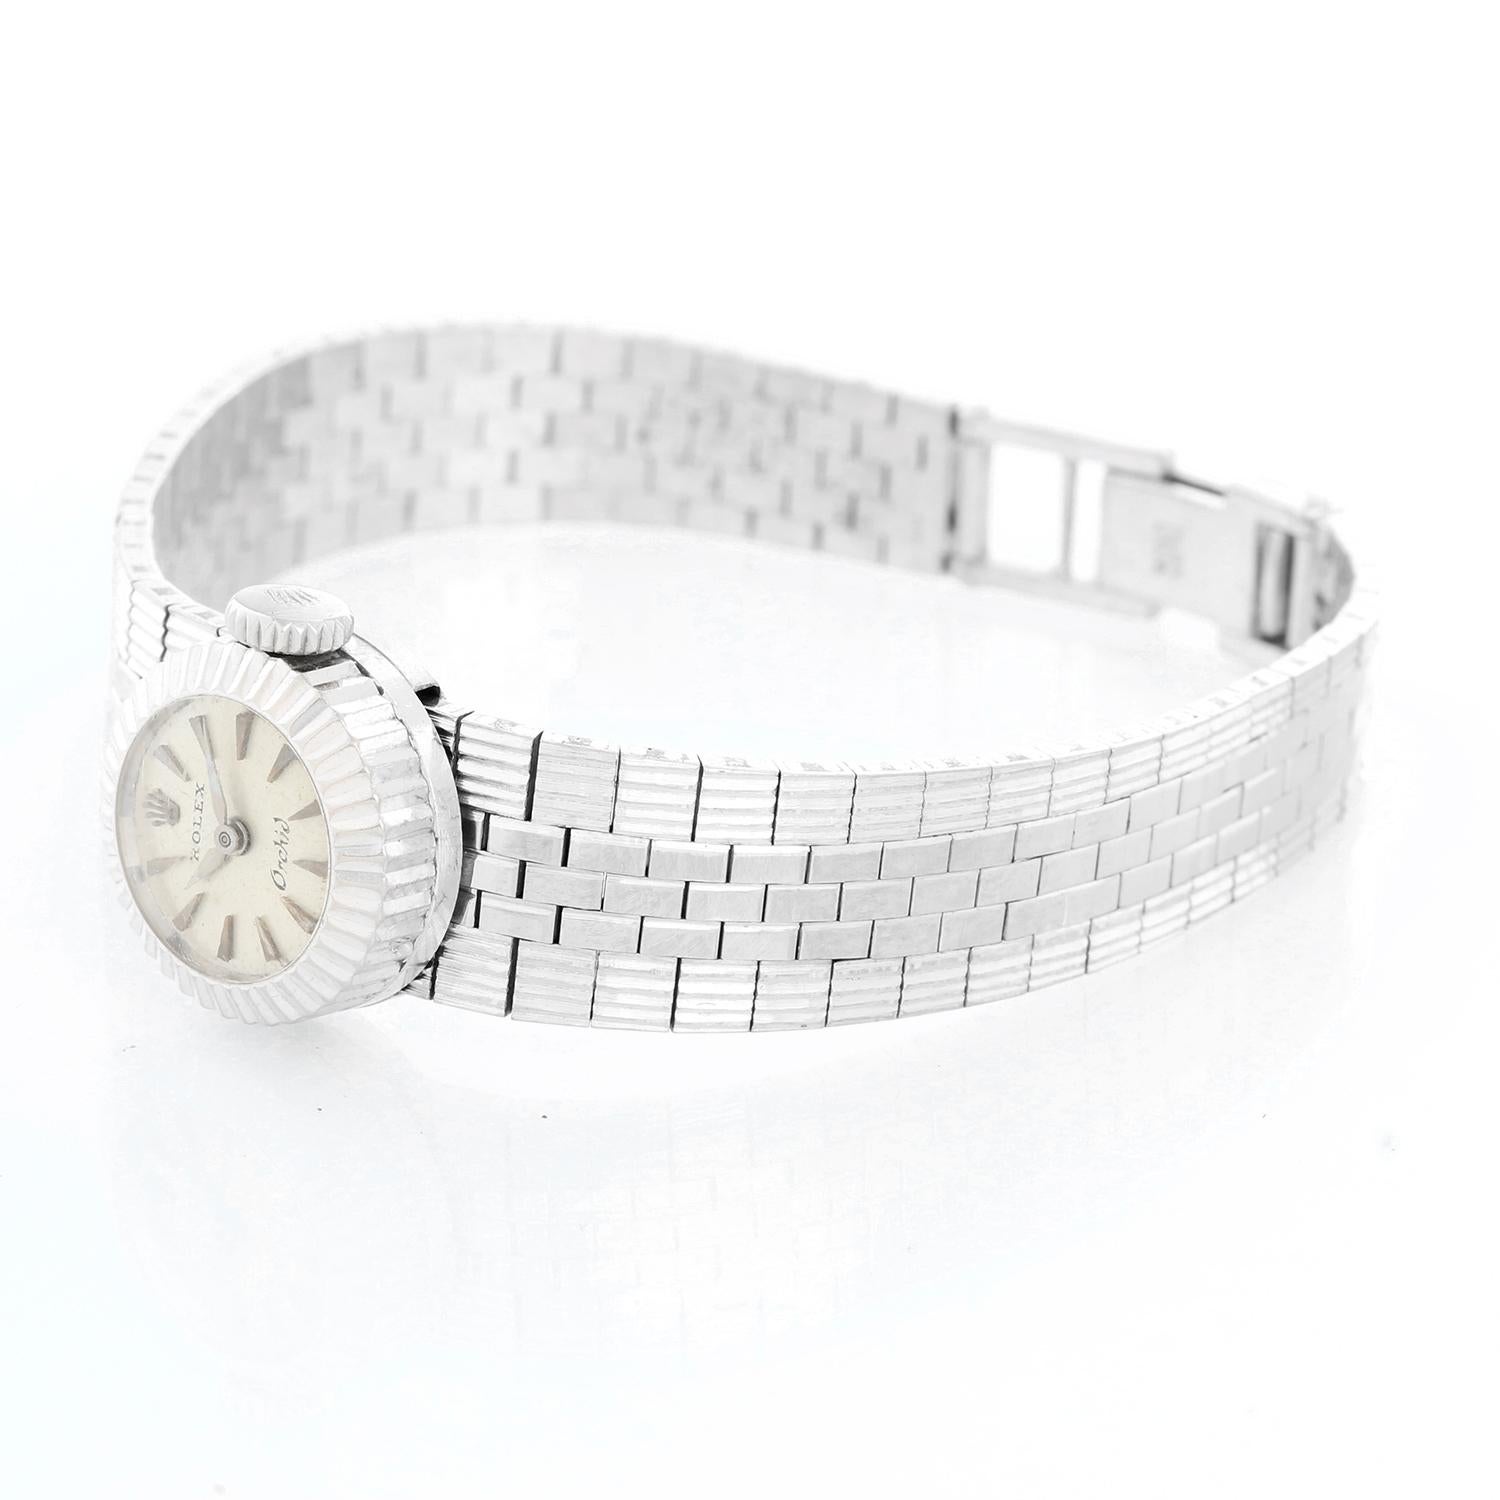 Vintage Rolex Orchid Chameleon 14K White Gold Ladies - Manual winding. 14K white gold case with slot through which bands can be interchanged (16 mm). Silver textured dial with gold stick markers. White gold bracelet measuring 6.5 inches. Pre-owned